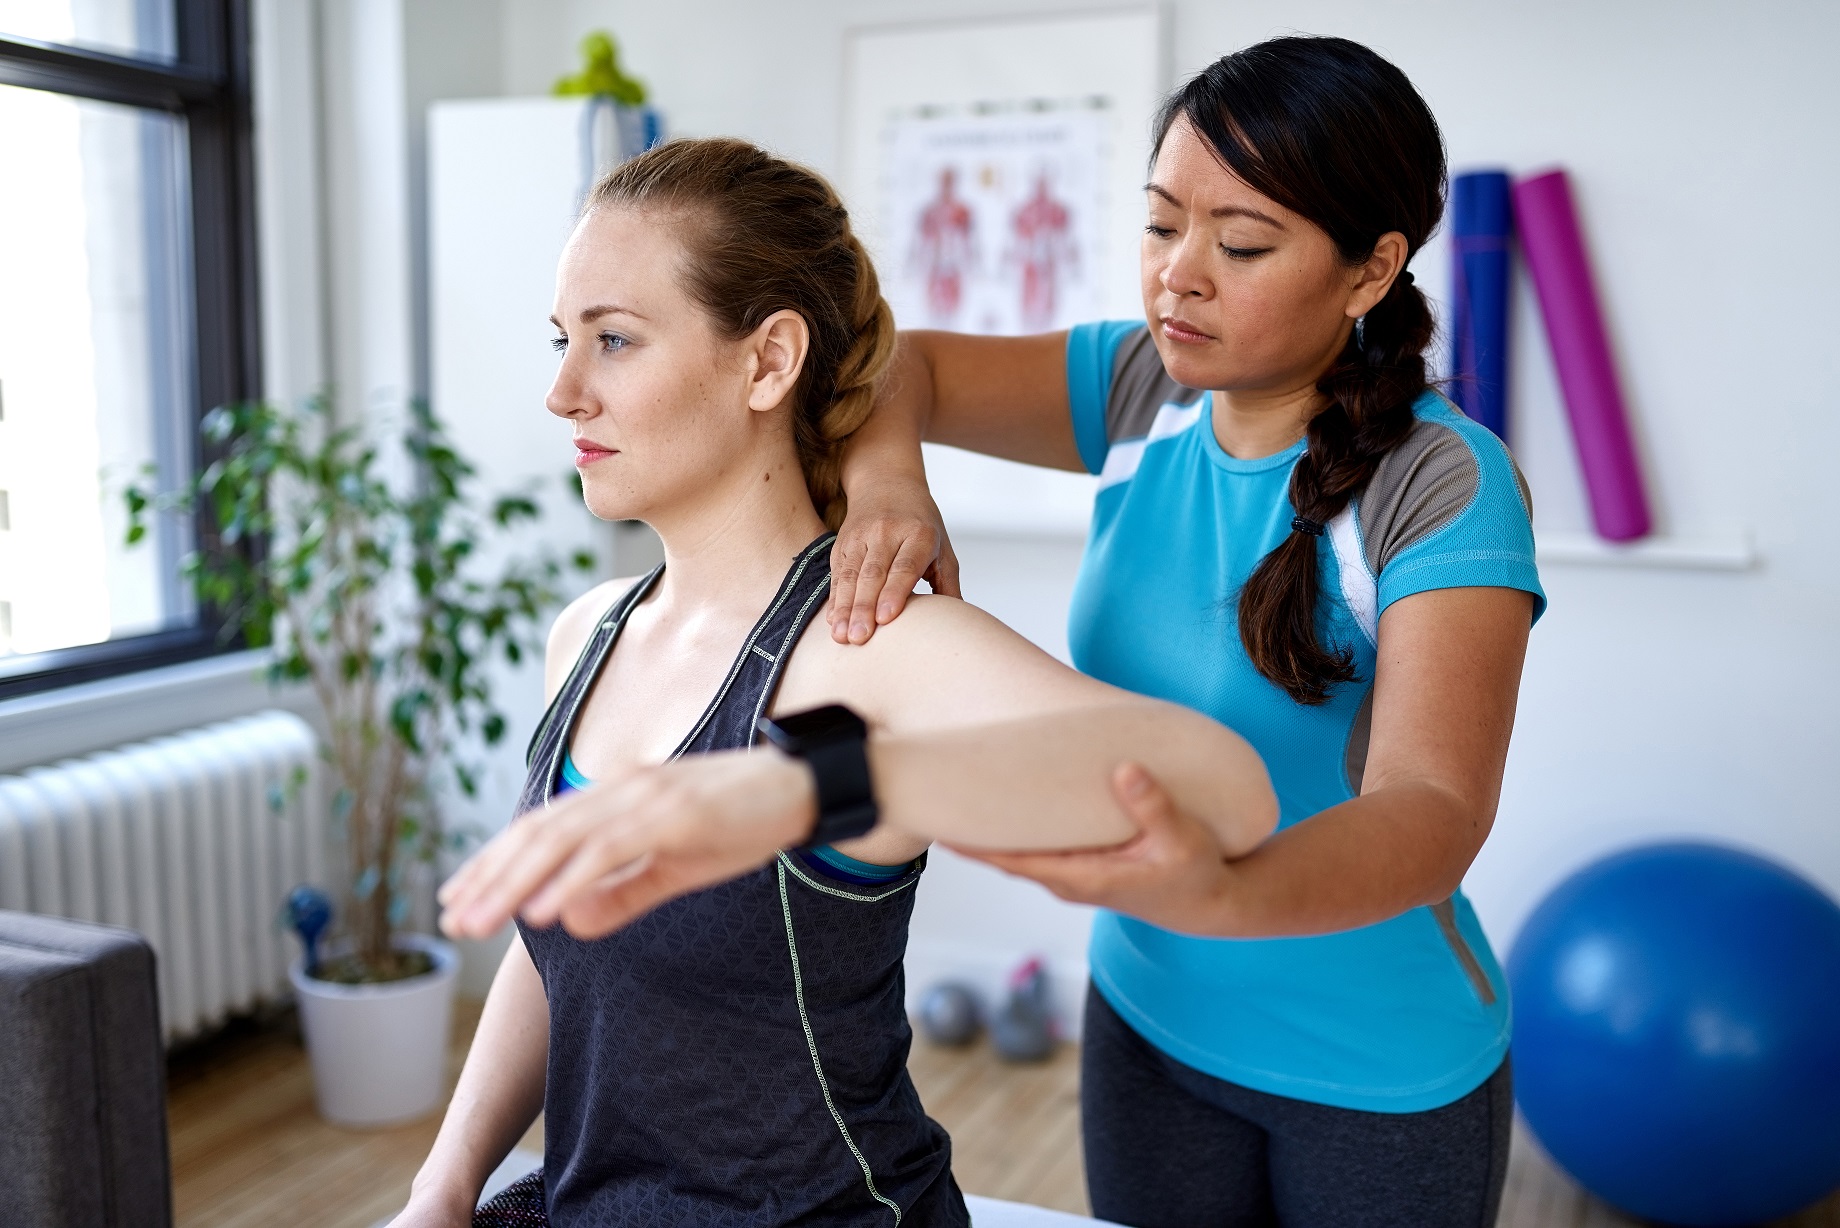 <strong>Physical Therapy Can Be Used to Improve Daily Life, Not Just Recuperation from Traumatic Injuries</strong> <br> <br> Physical Therapy isn’t just for people who need to learn to walk again, it can help people with acute or chronic pain, balance and vertigo, headaches, concussion, jaw pain, incontinence, pain with sex, neurological disorders, or any physical problems limiting you from doing what you want to do. <br> <br> A lot of people don’t fully understand what physical therapy (and speech and occupational therapy) can do for them. Our goal is to get you out of our clinic as soon as possible so your condition has either resolved completely and/or you now have the tools to manage it well without us! <br> <br> <em> - u/mydogisthedawg </em>